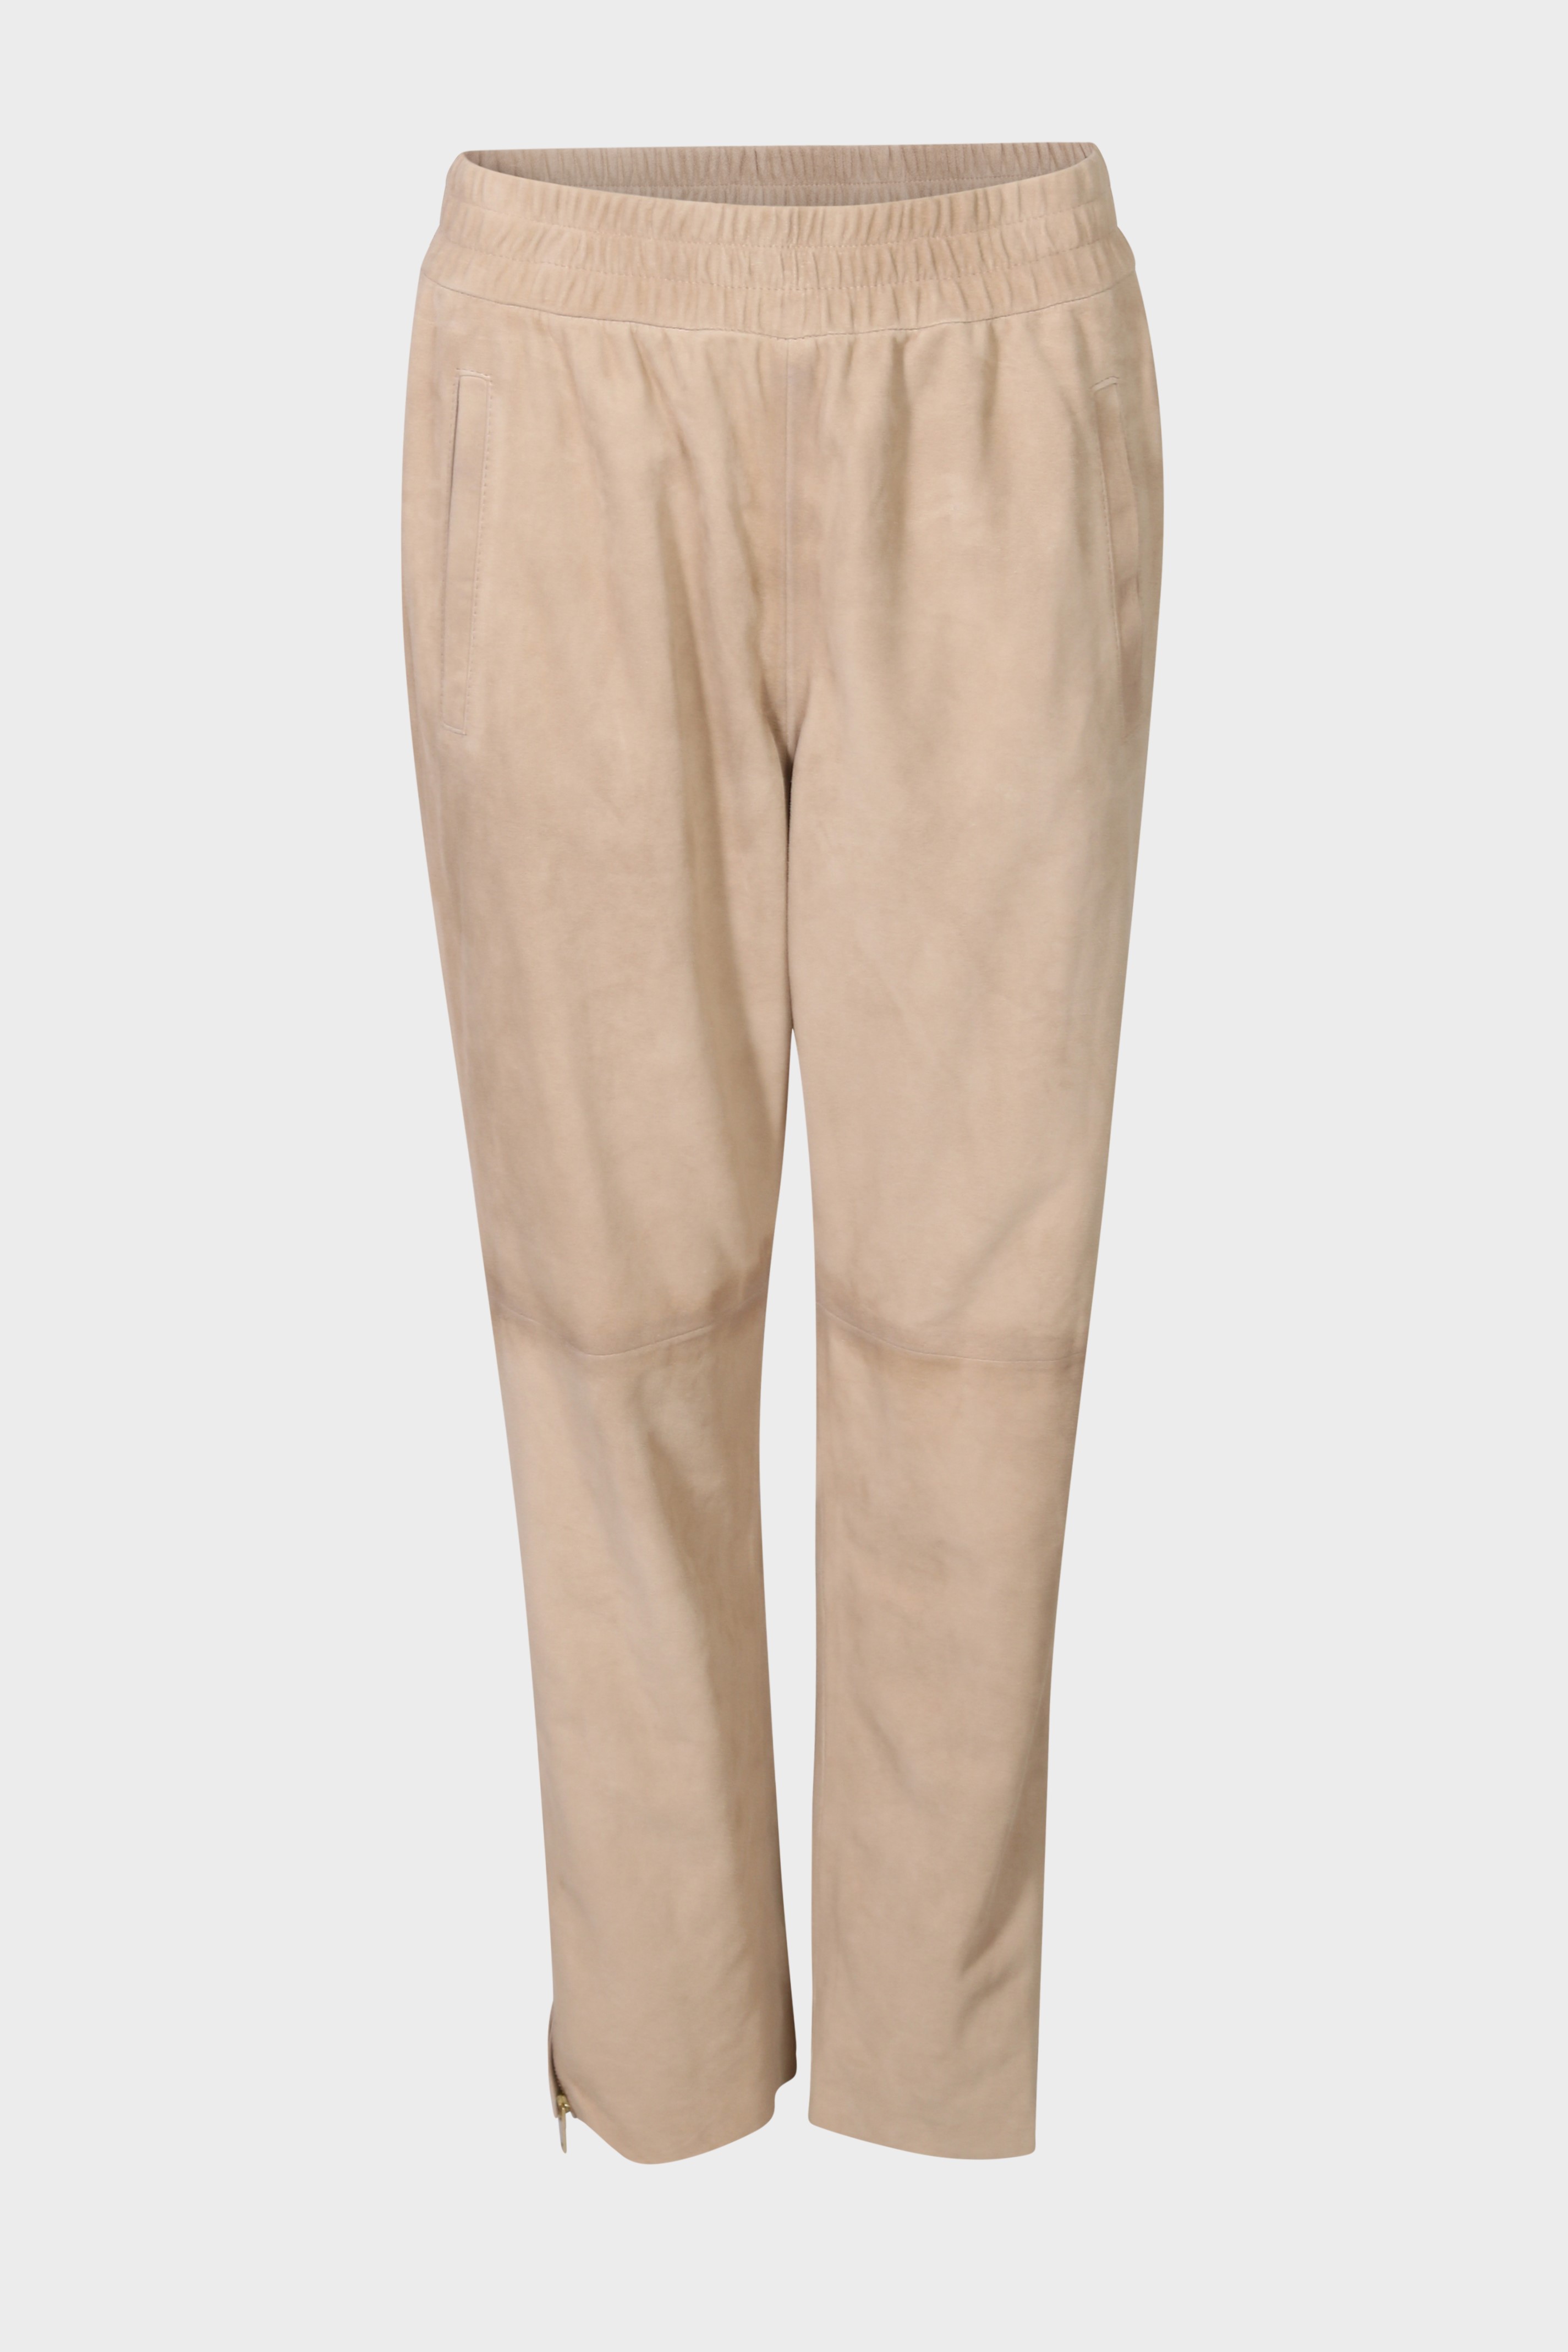 GOLDEN GOOSE Leather Joggpant in Sand IT 40 / EU 34